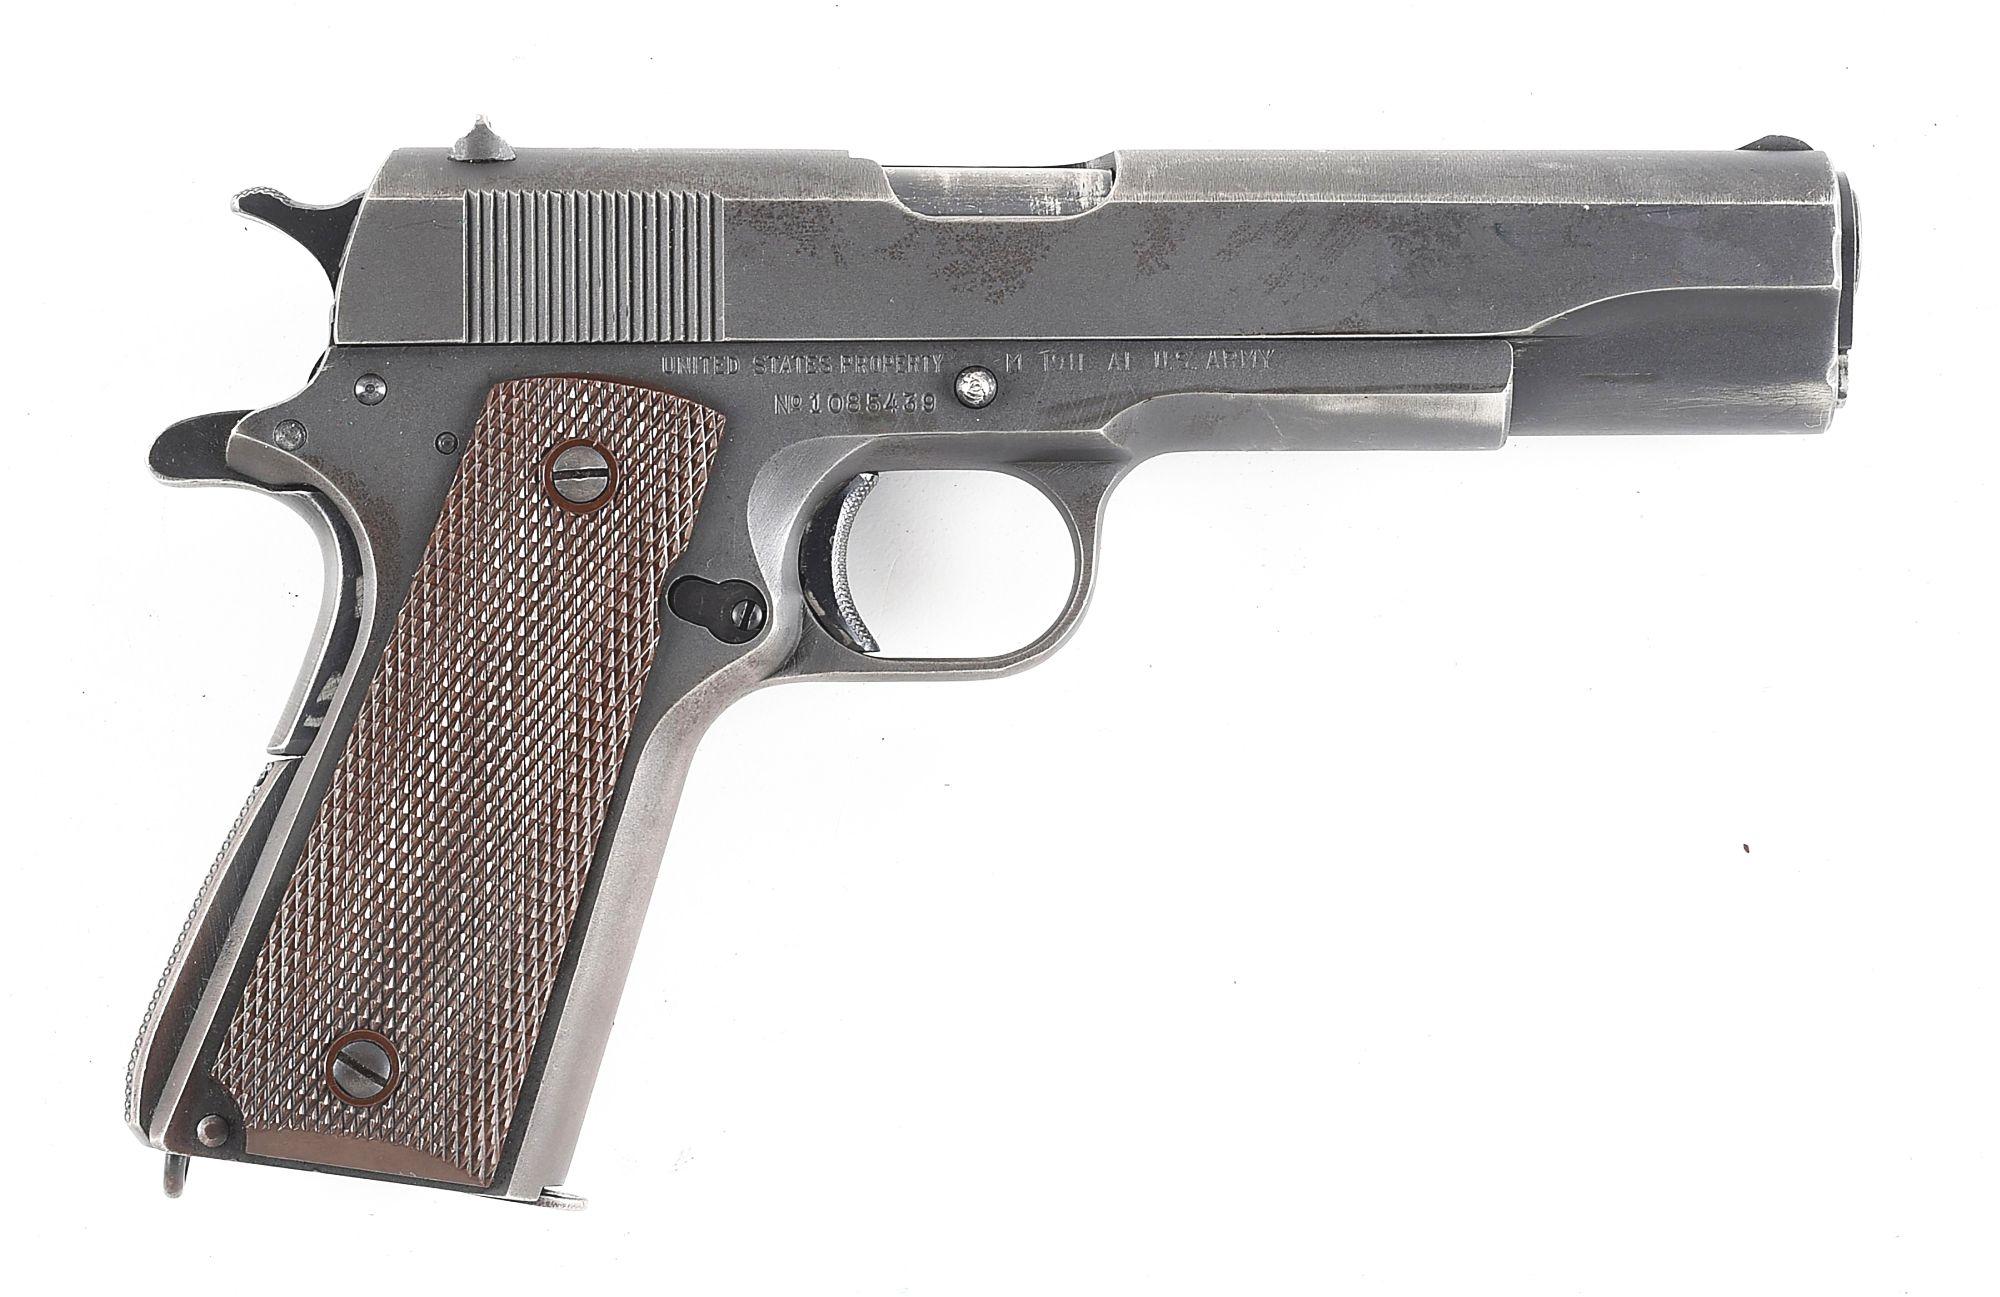 (C) UNION SWITCH AND SIGNAL M1911A1 SEMI-AUTOMATIC PISTOL WITH BOYT HOLSTER.